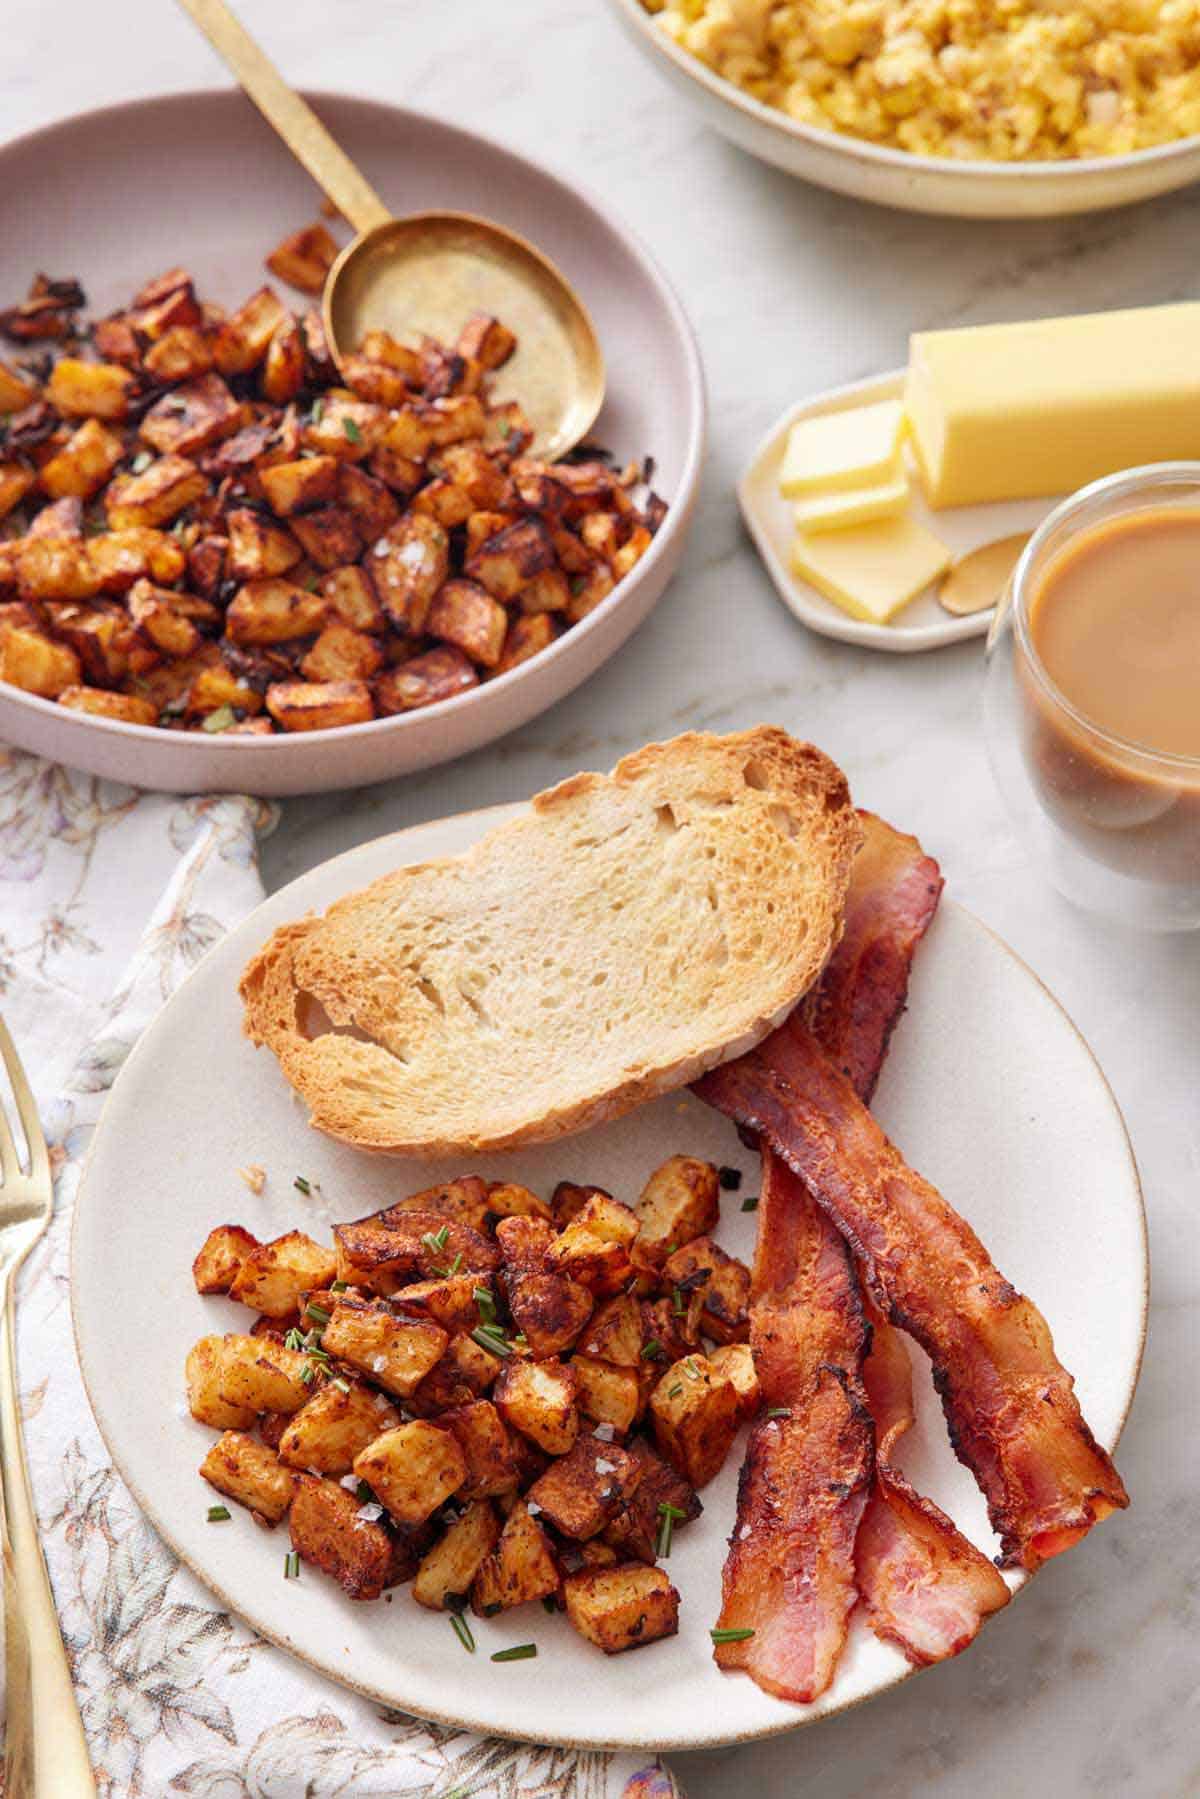 A plate with breakfast potatoes, bacon strips, and toast. A plate with more breakfast potatoes, a cup of coffee, and butter in the background.